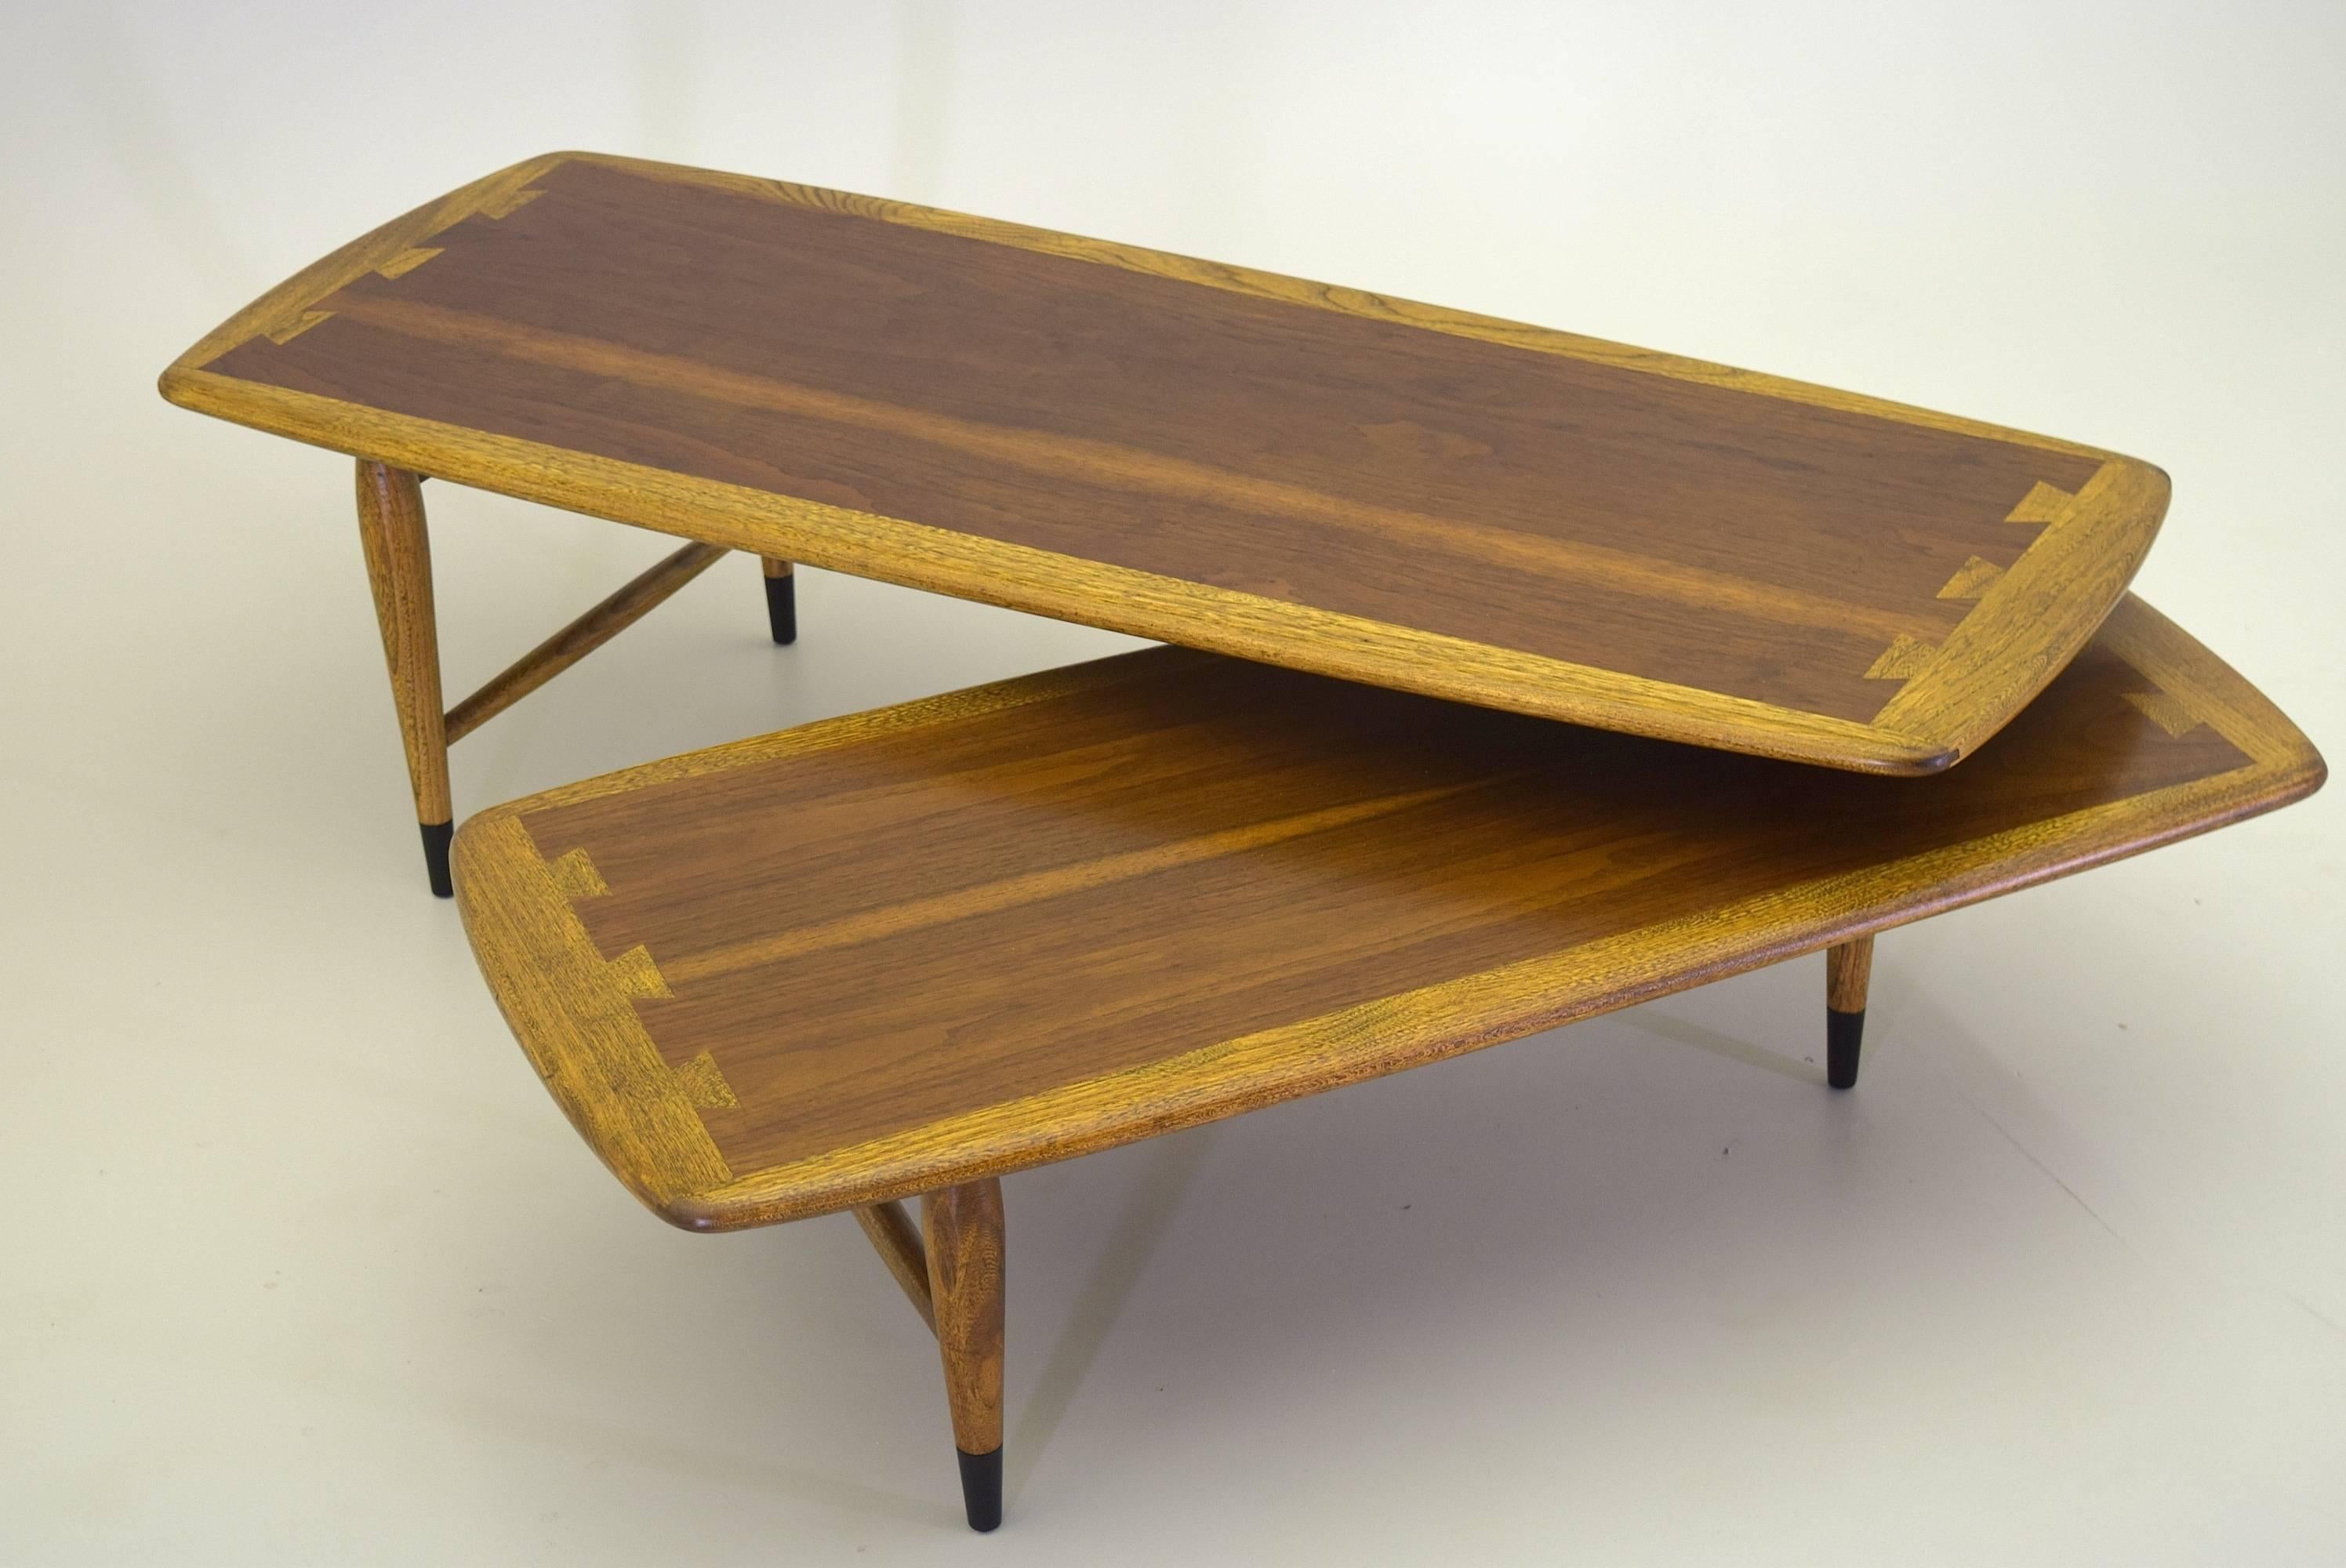 This articulating coffee table (referred to as the Switchblade Table) was part of the Acclaim design line by Andre Bus for Lane Furniture introduced in 1958. 

This exceptional vintage table has been fully restored, completed in a fine lacquer and